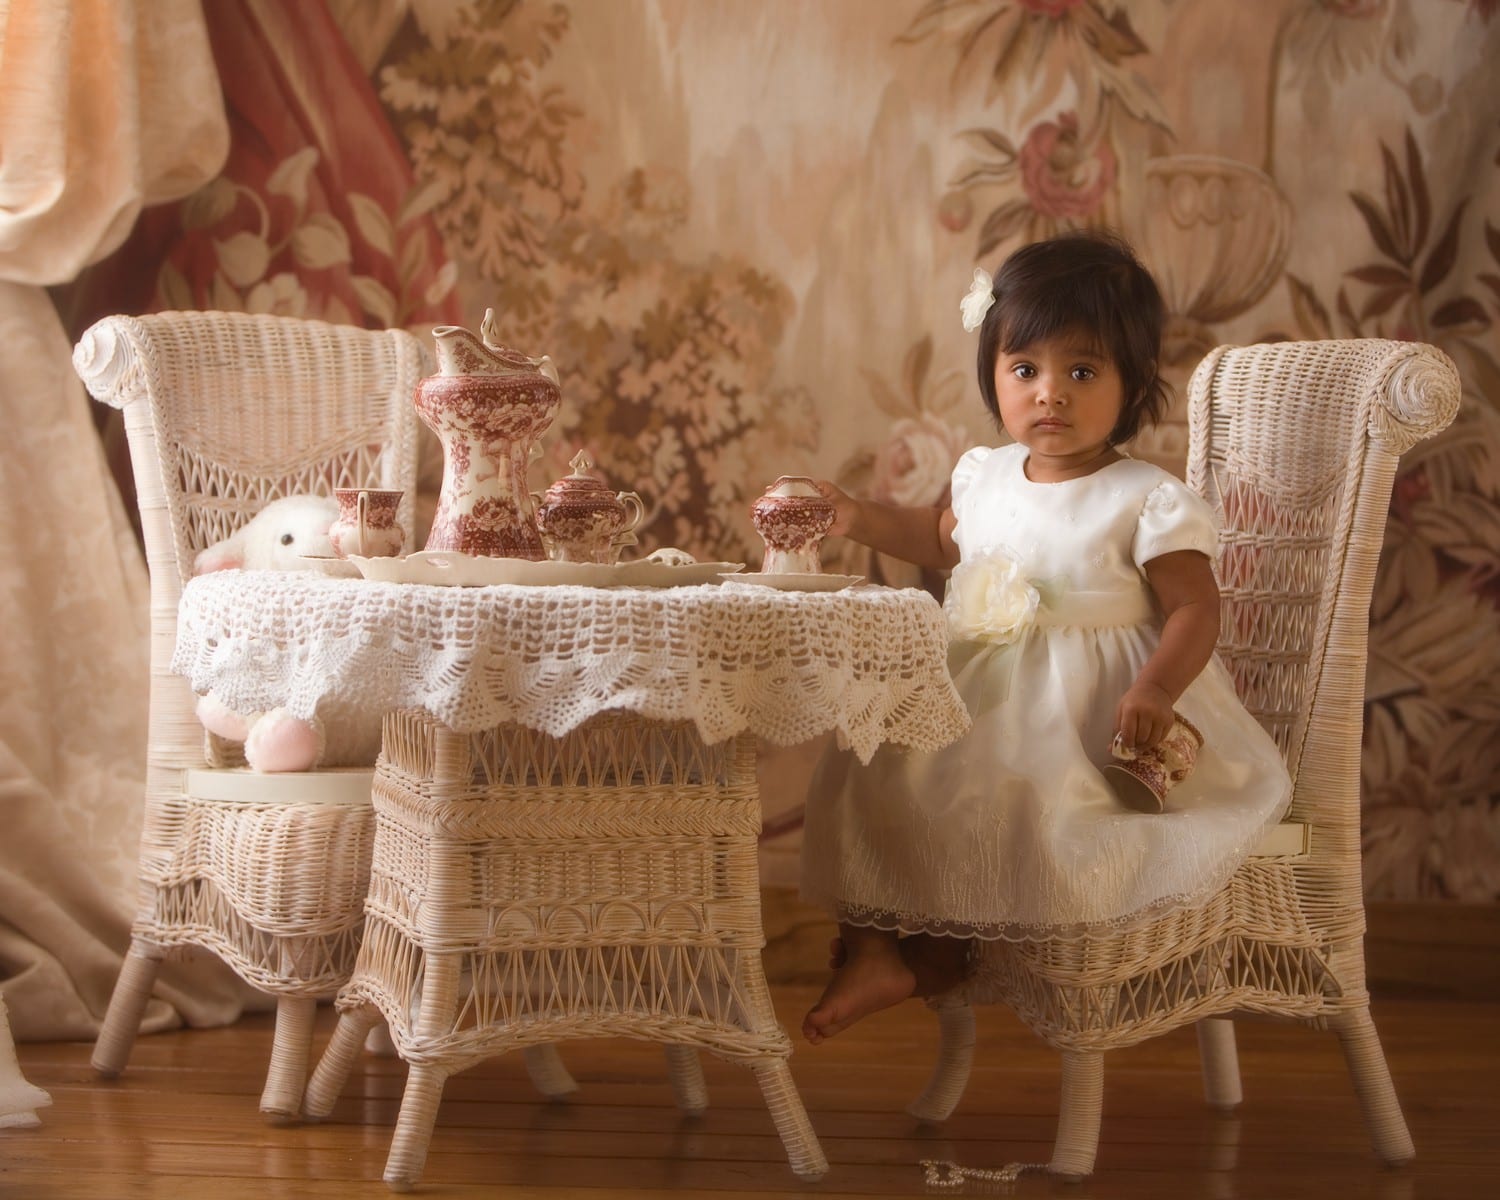 little girl tea table and chairs